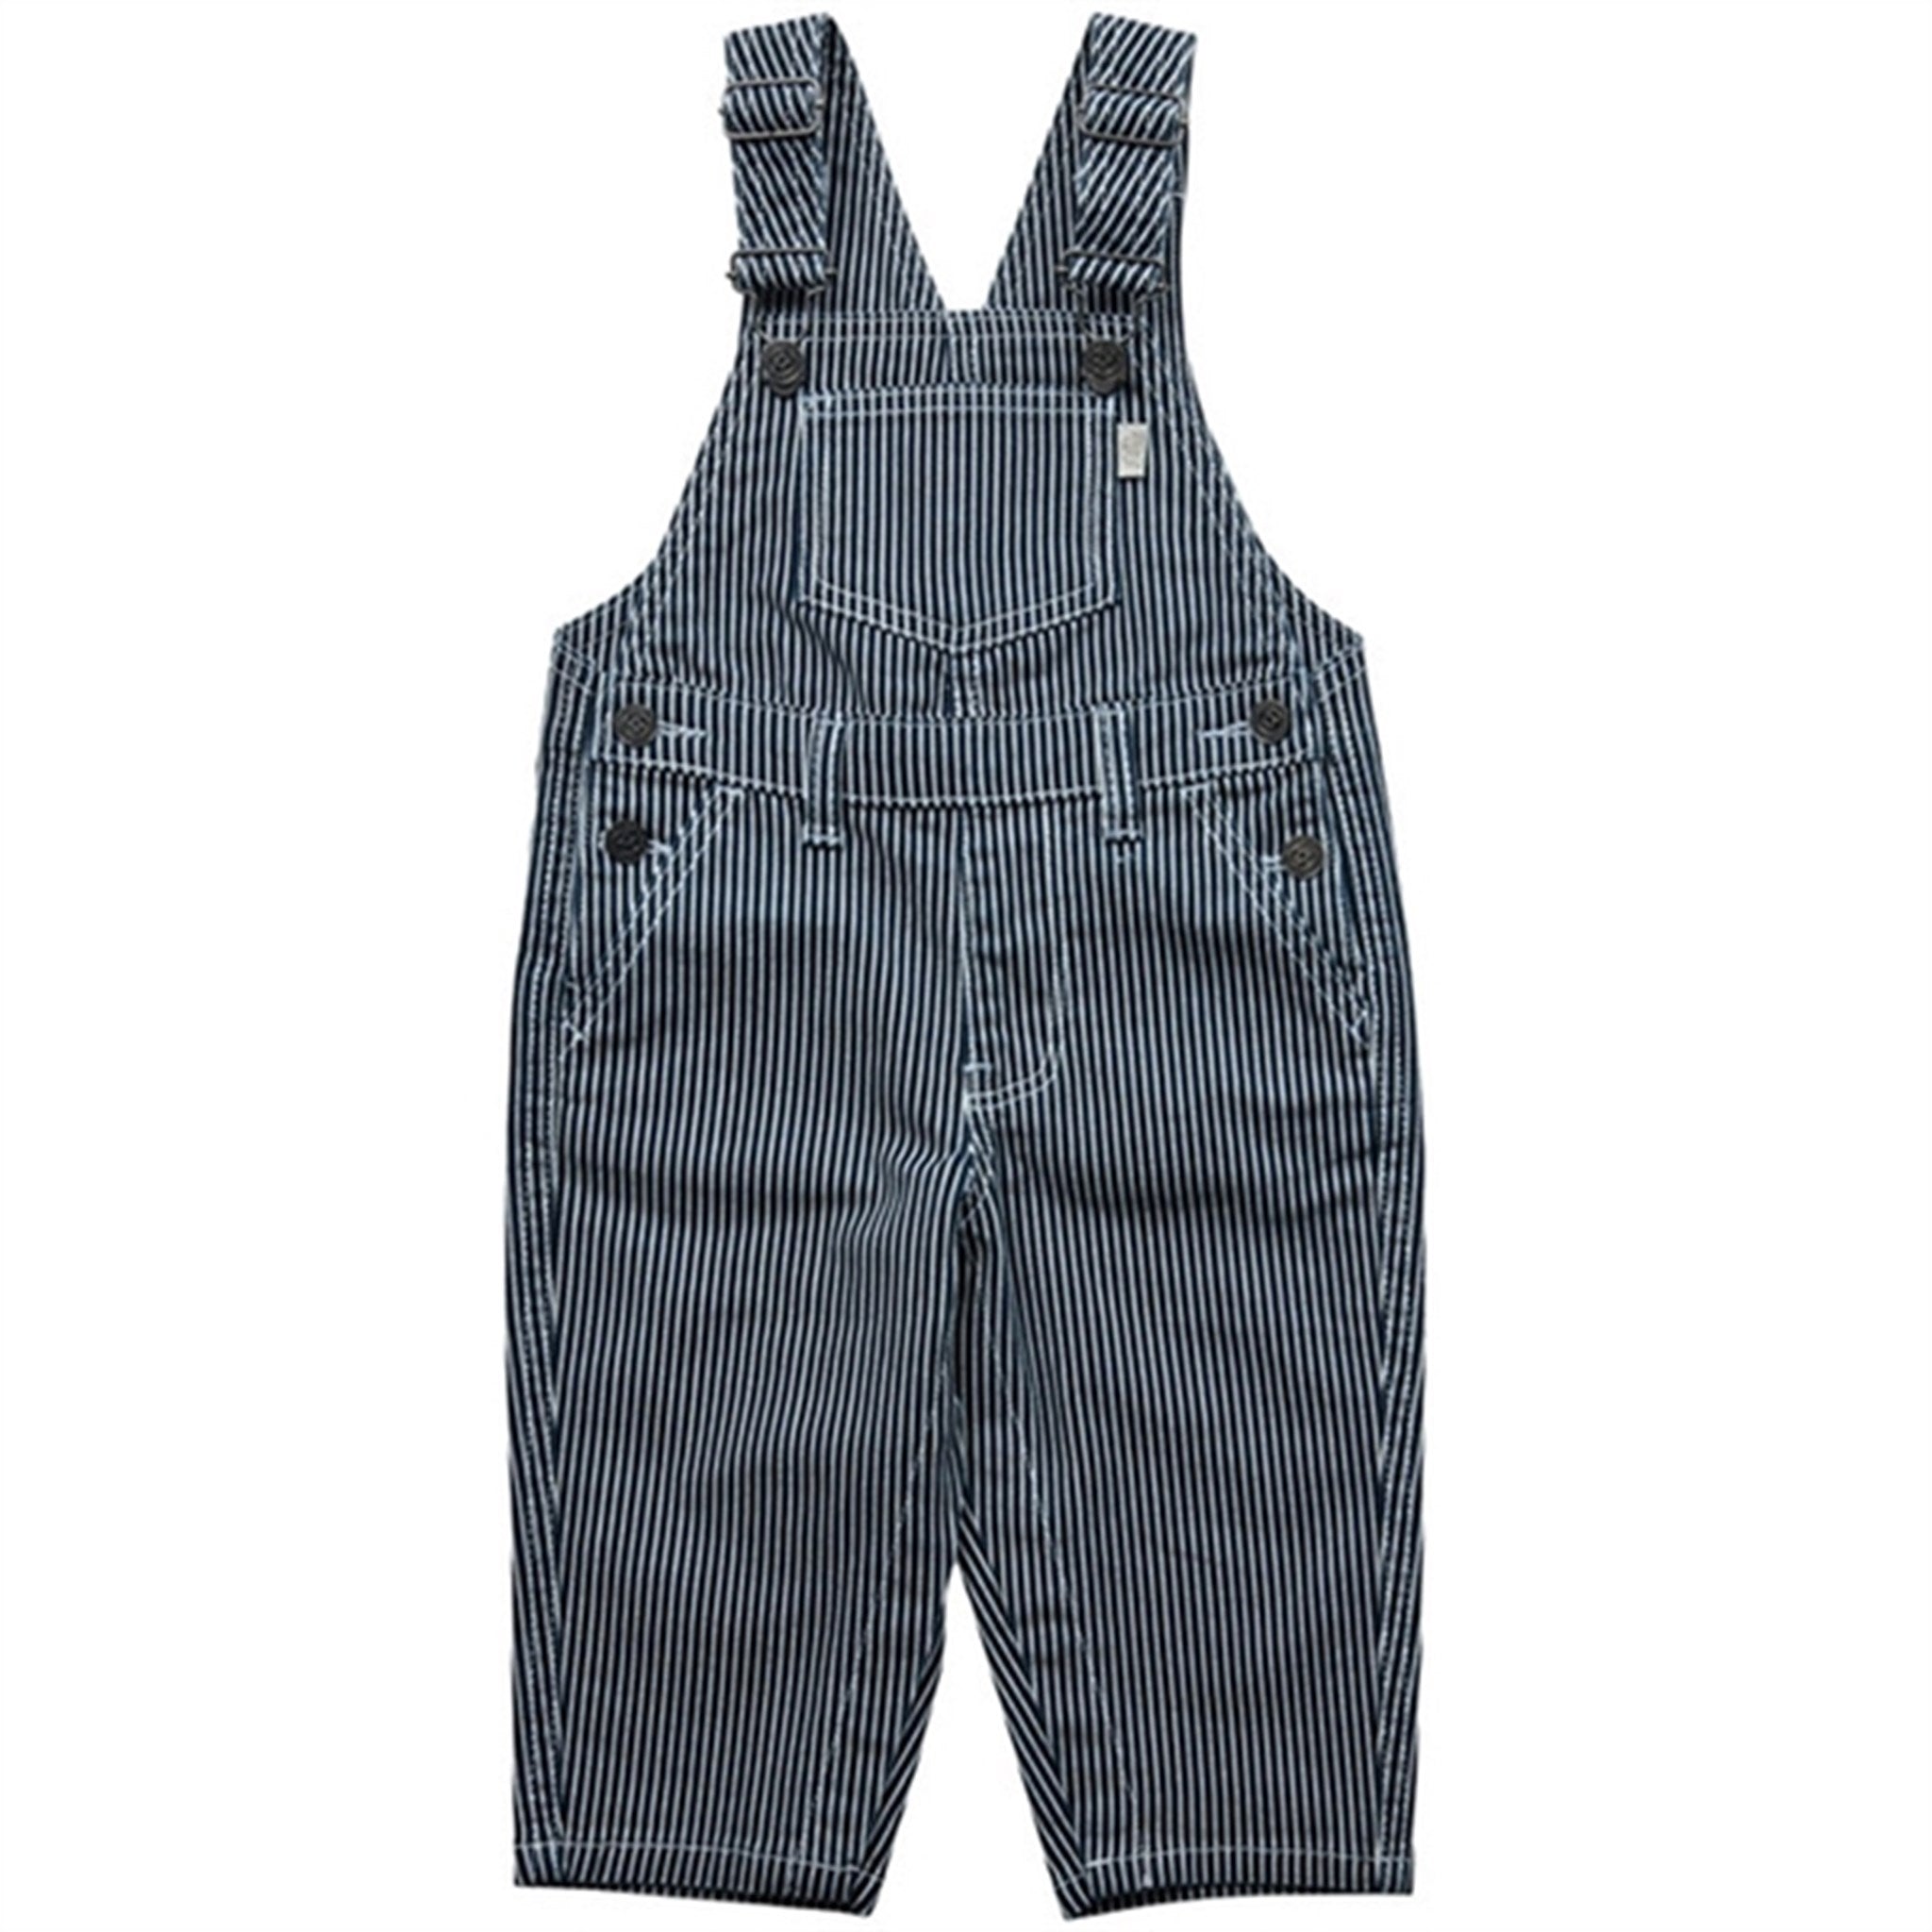 Sofie Schnoor Blue Striped Overall